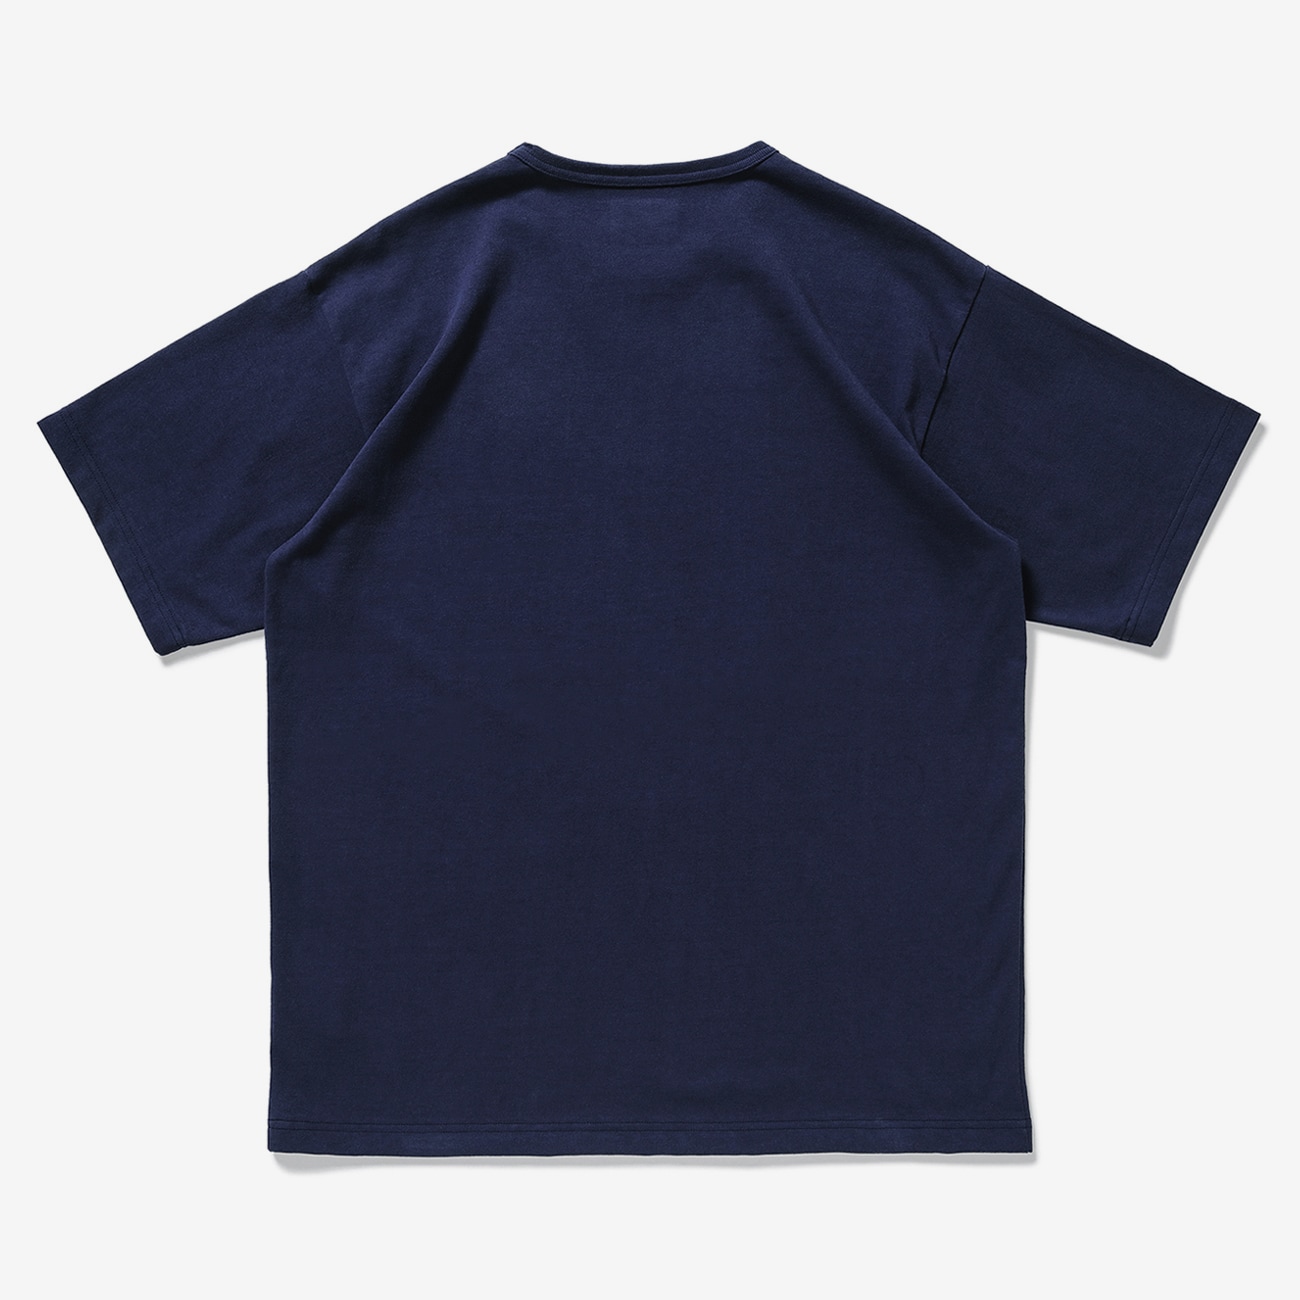 WTAPS  COLLEGE / SS / COTTONTシャツ/カットソー(半袖/袖なし)